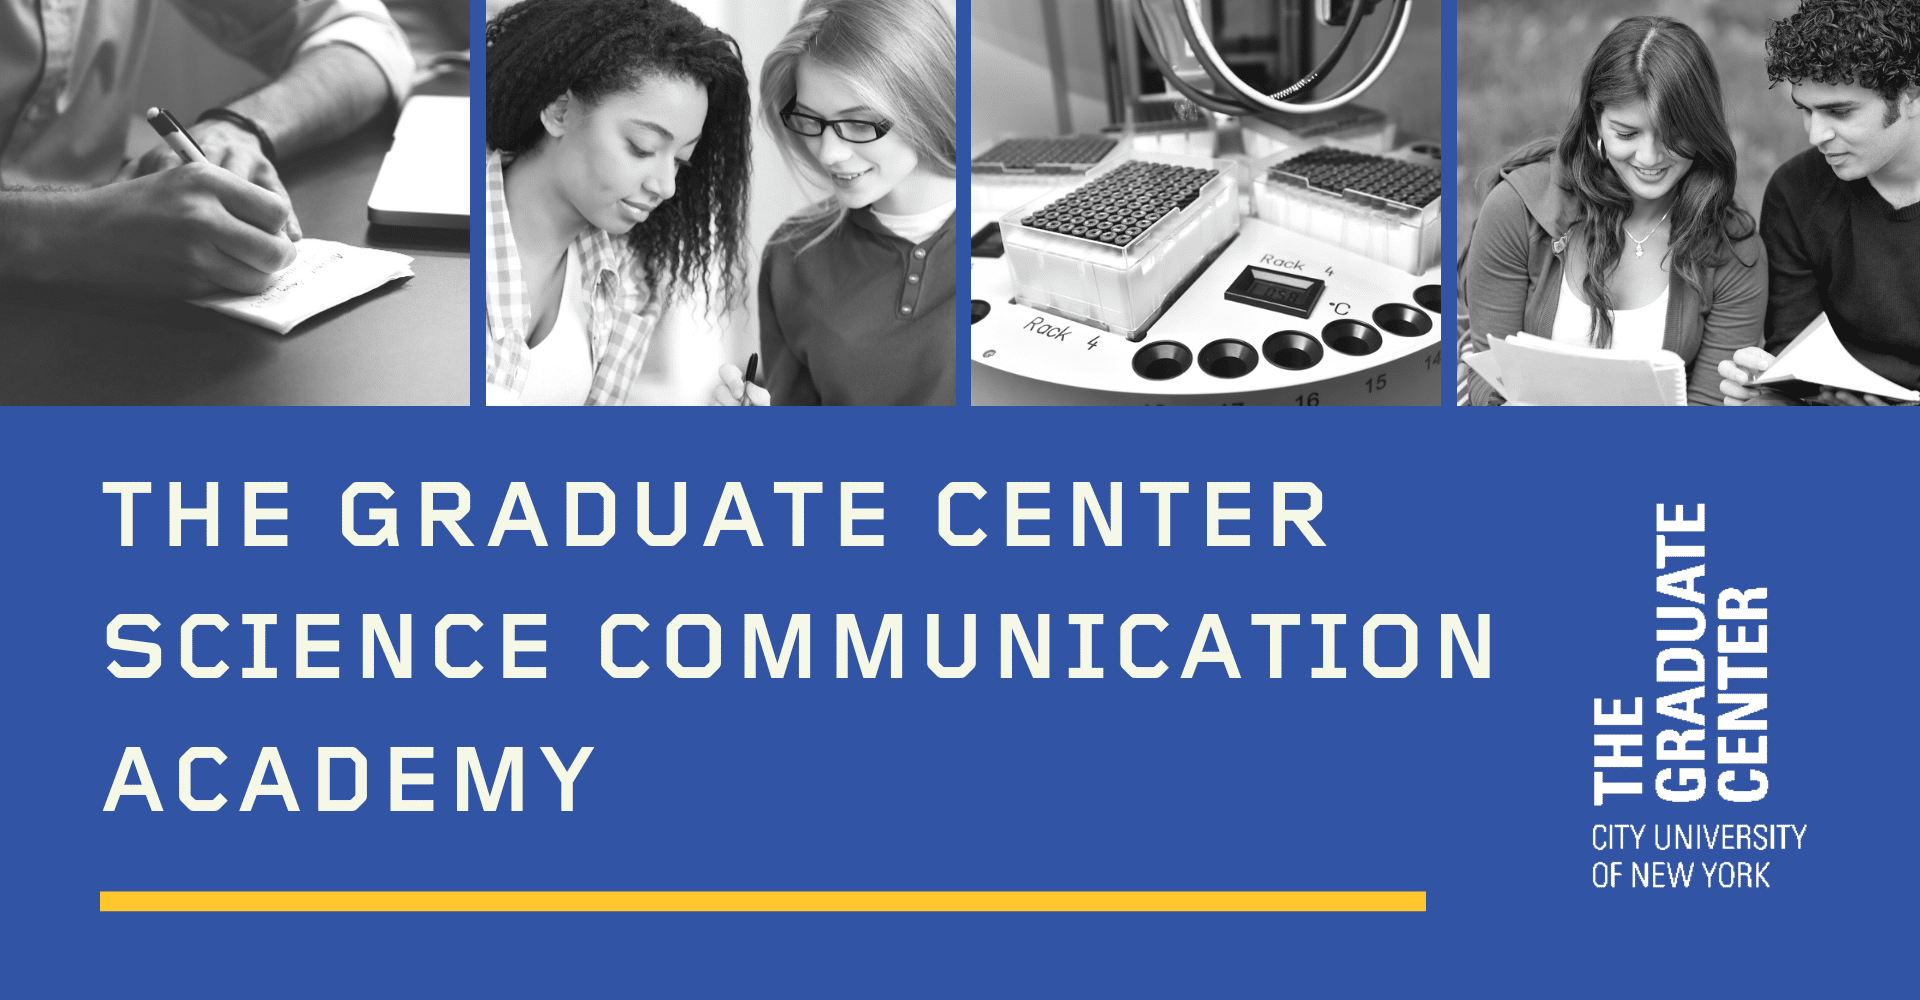 Banner image: 4 black and white photos of students, researchers and research equipment, with the title "The Graduate Center Science Communication Academy" and The Graduate Center logo